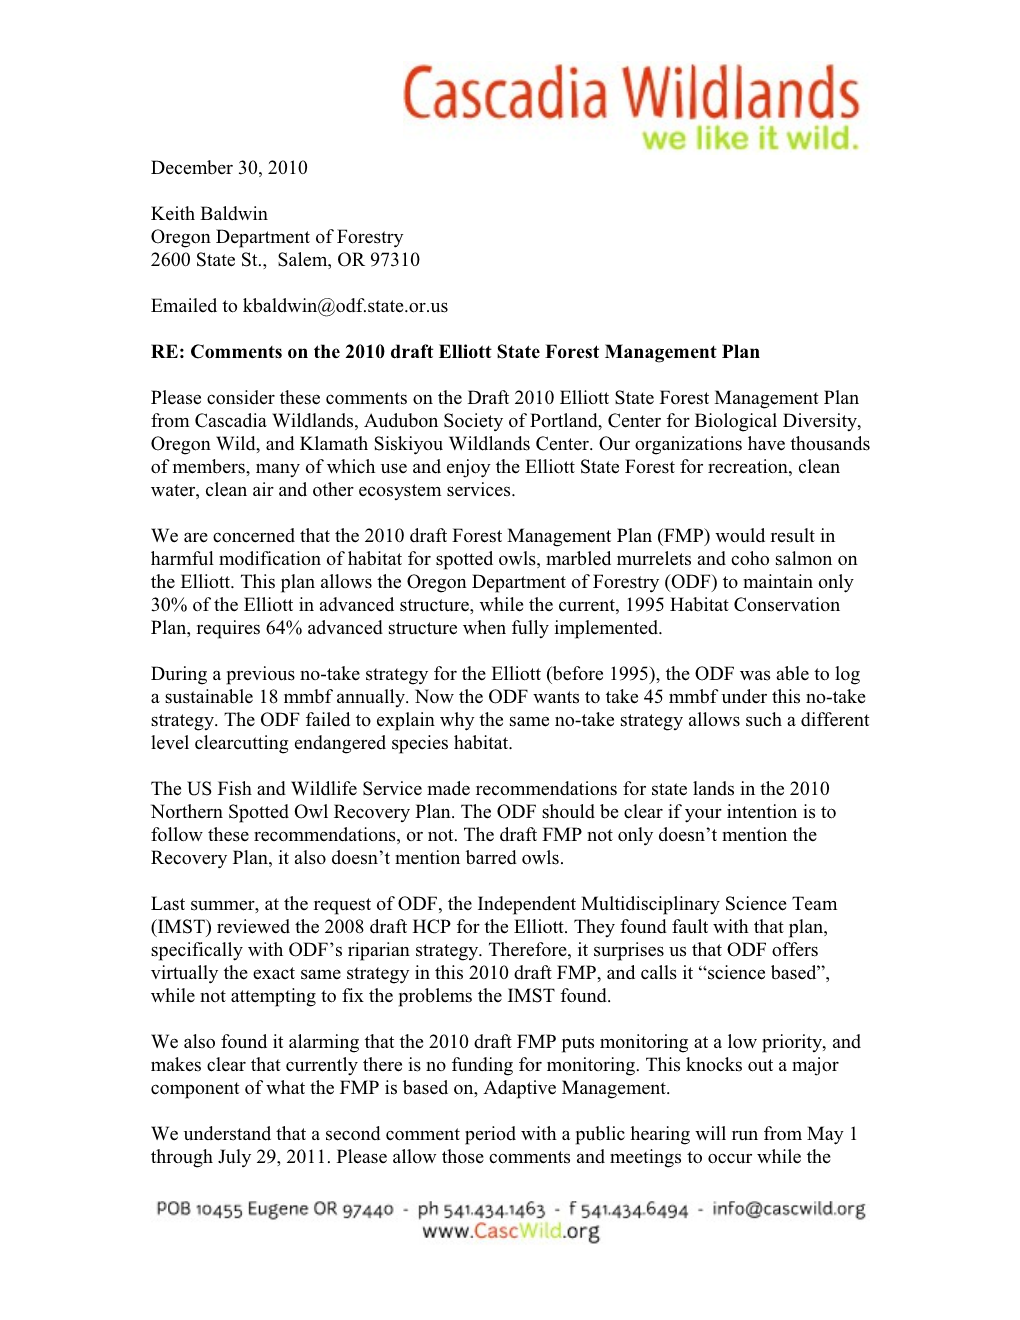 RE: Comments on the 2010 Draft Elliott State Forest Management Plan